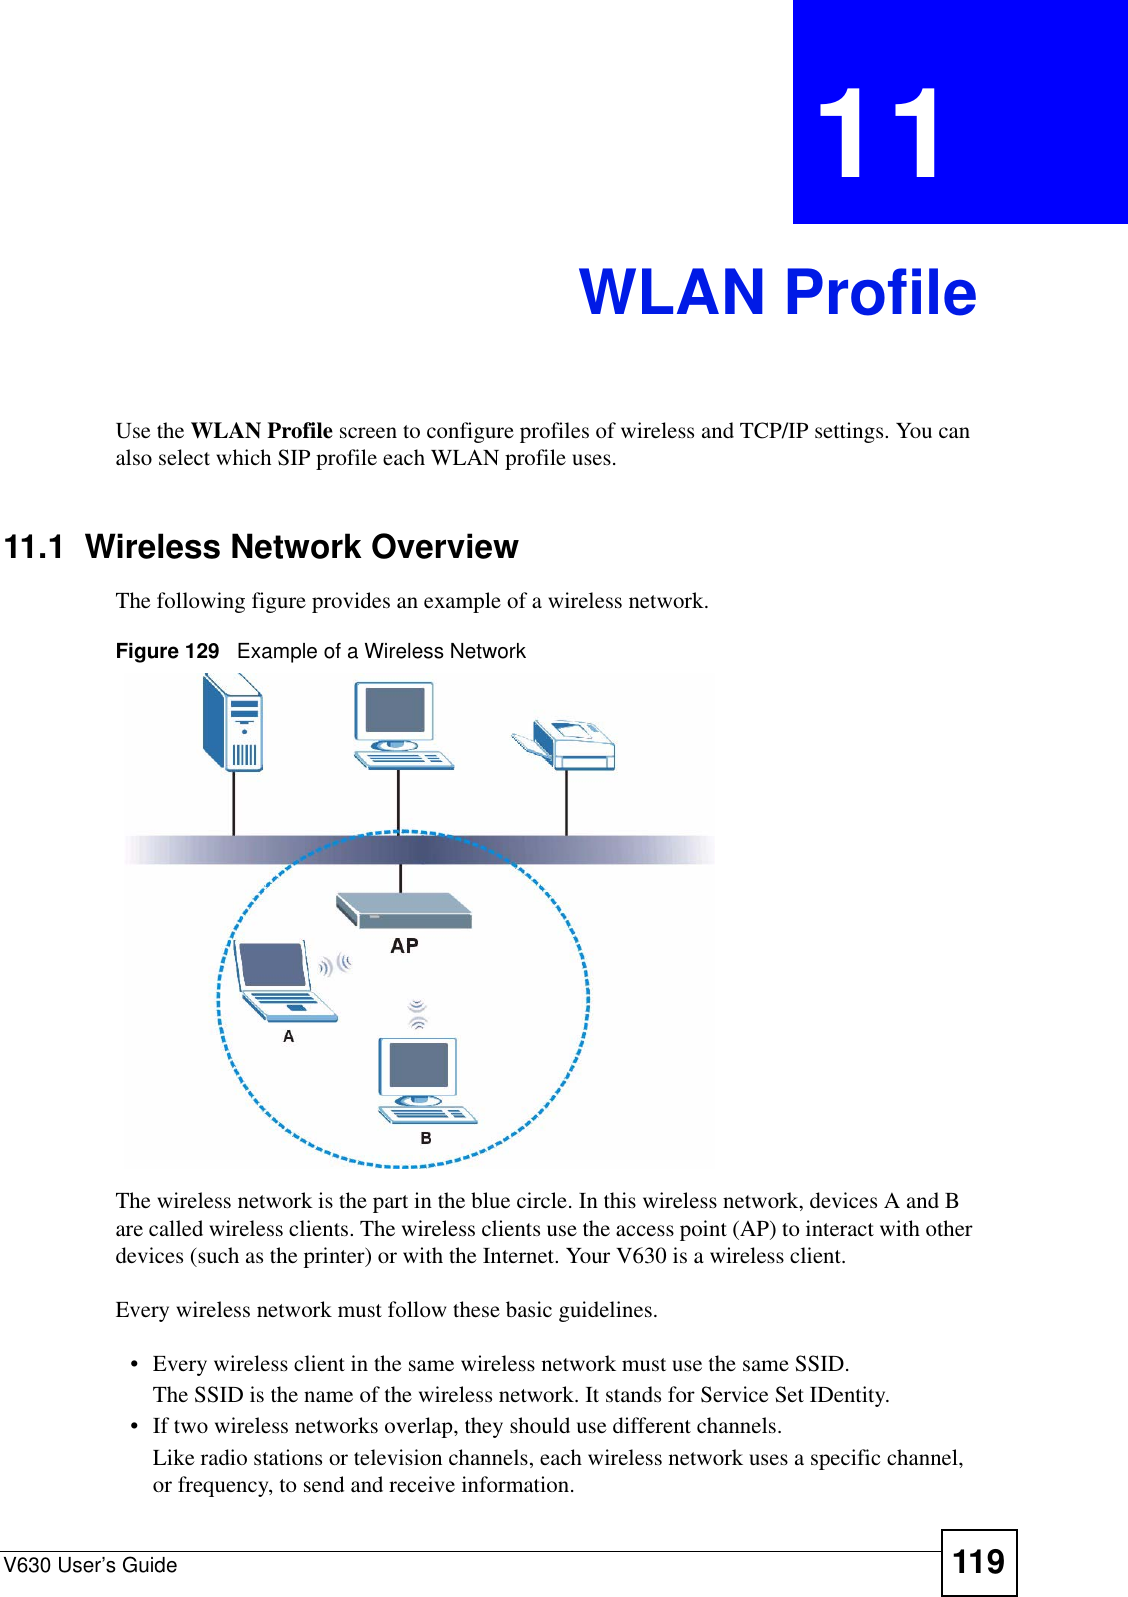 V630 User’s Guide 119CHAPTER  11 WLAN ProfileUse the WLAN Profile screen to configure profiles of wireless and TCP/IP settings. You can also select which SIP profile each WLAN profile uses. 11.1  Wireless Network OverviewThe following figure provides an example of a wireless network.Figure 129   Example of a Wireless NetworkThe wireless network is the part in the blue circle. In this wireless network, devices A and B are called wireless clients. The wireless clients use the access point (AP) to interact with other devices (such as the printer) or with the Internet. Your V630 is a wireless client.Every wireless network must follow these basic guidelines.• Every wireless client in the same wireless network must use the same SSID.The SSID is the name of the wireless network. It stands for Service Set IDentity.• If two wireless networks overlap, they should use different channels.Like radio stations or television channels, each wireless network uses a specific channel, or frequency, to send and receive information.